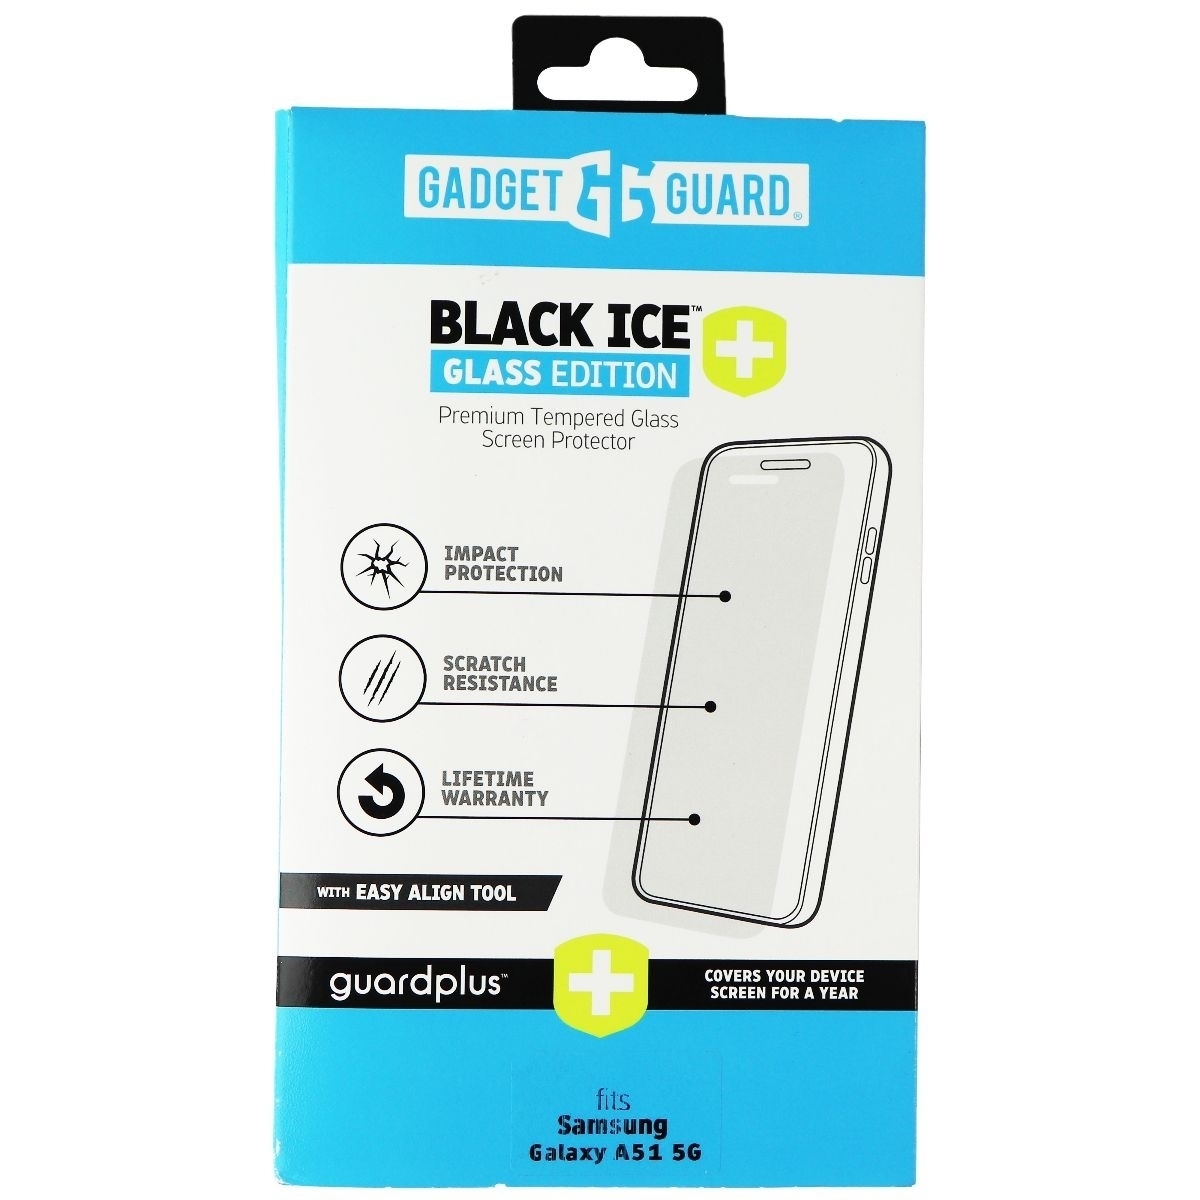 Gadget Guard (Black Ice+) Glass Edition For Samsung Galaxy A51 5G - Clear